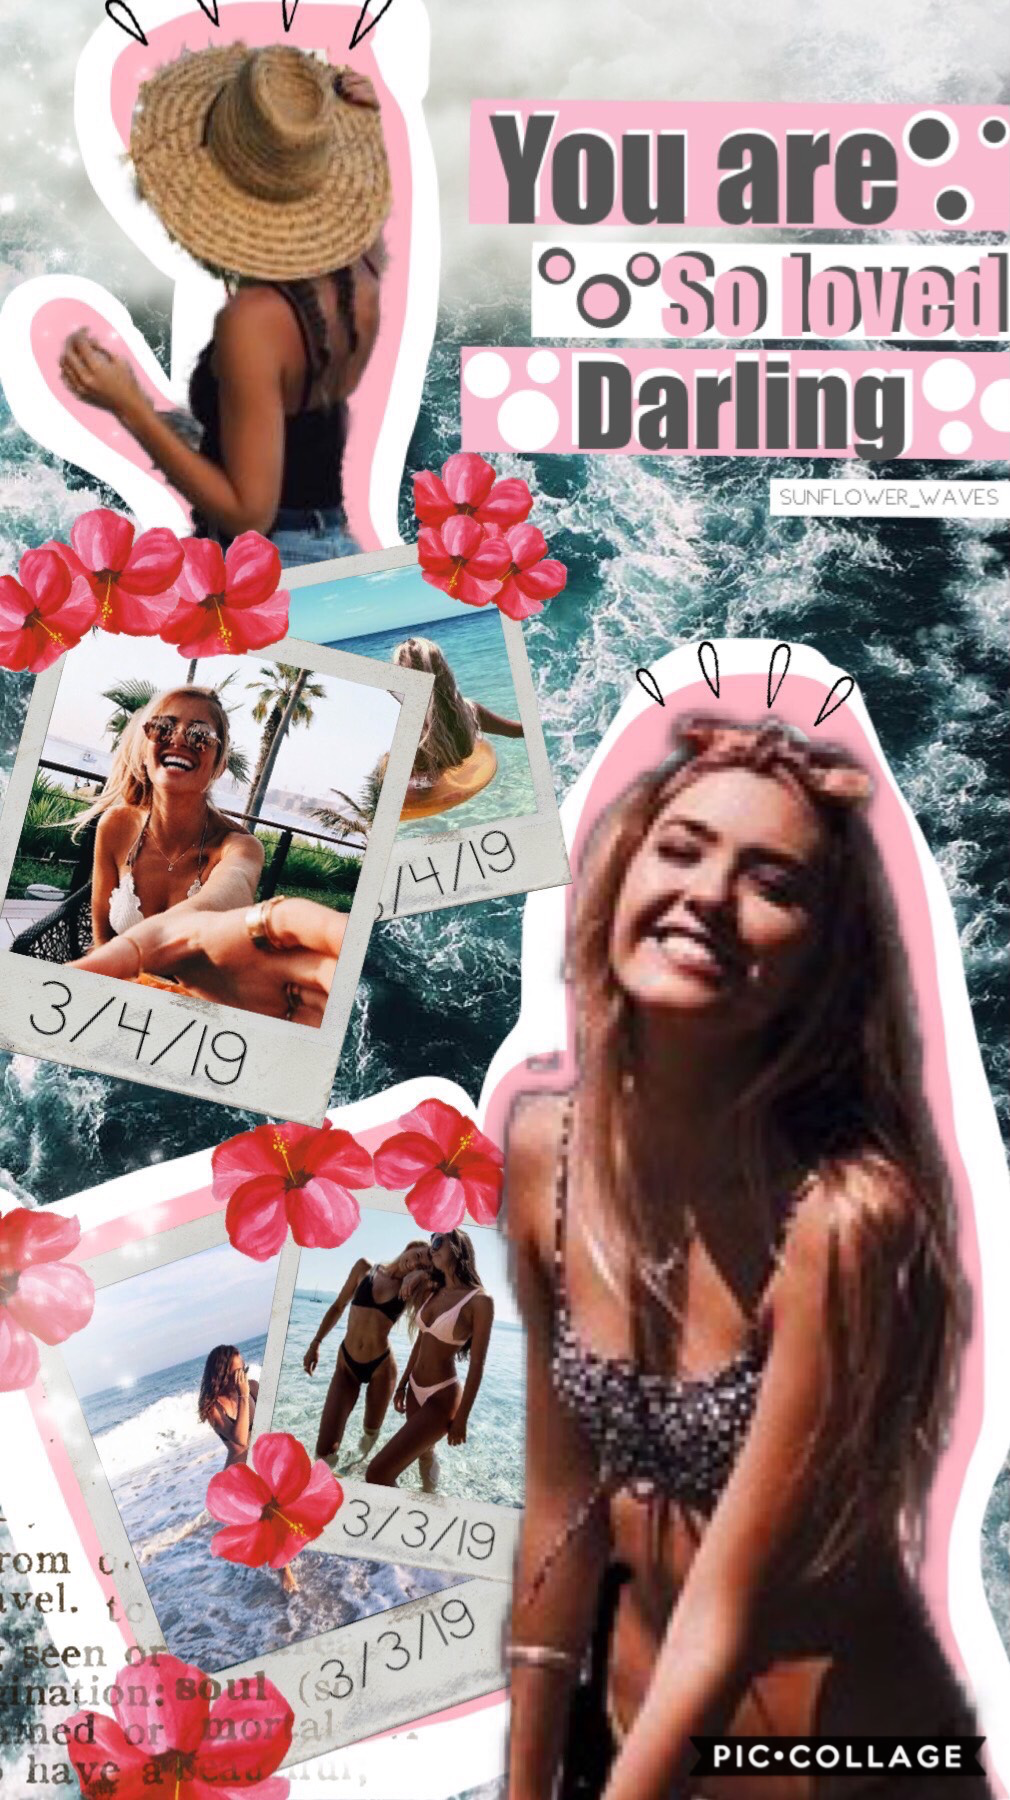 🌿tap🌿{3/6/19}
It has been a month since I past posted and I decided to make an edit to start to be active. I want to grow My account again slowly because all of u have been supporting me and I will like to continue and be active! , love liv 💖
